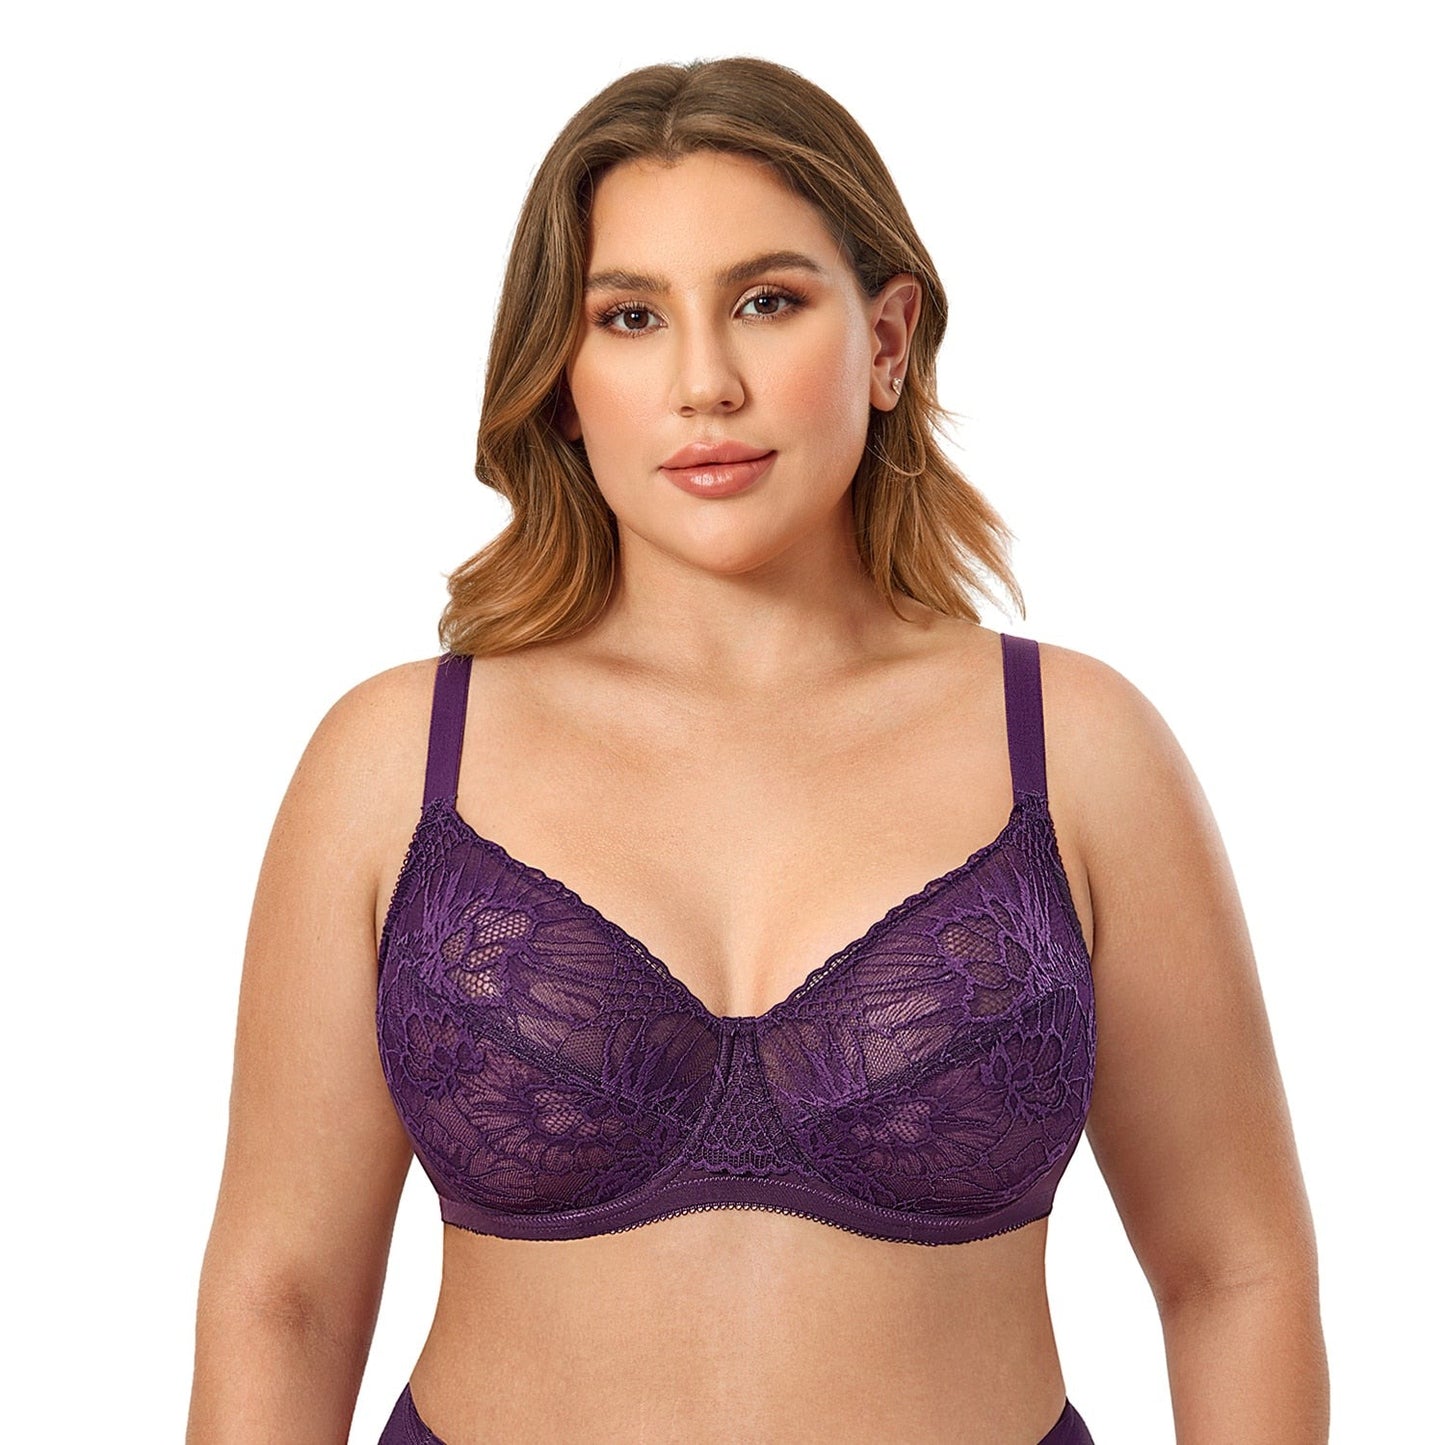 Sksloeg Plus Size Bras for Women Full Coverage Underwire Bras Plus Size,lifting  Deep Cup Bra for Heavy Breast,Complexion 44E 